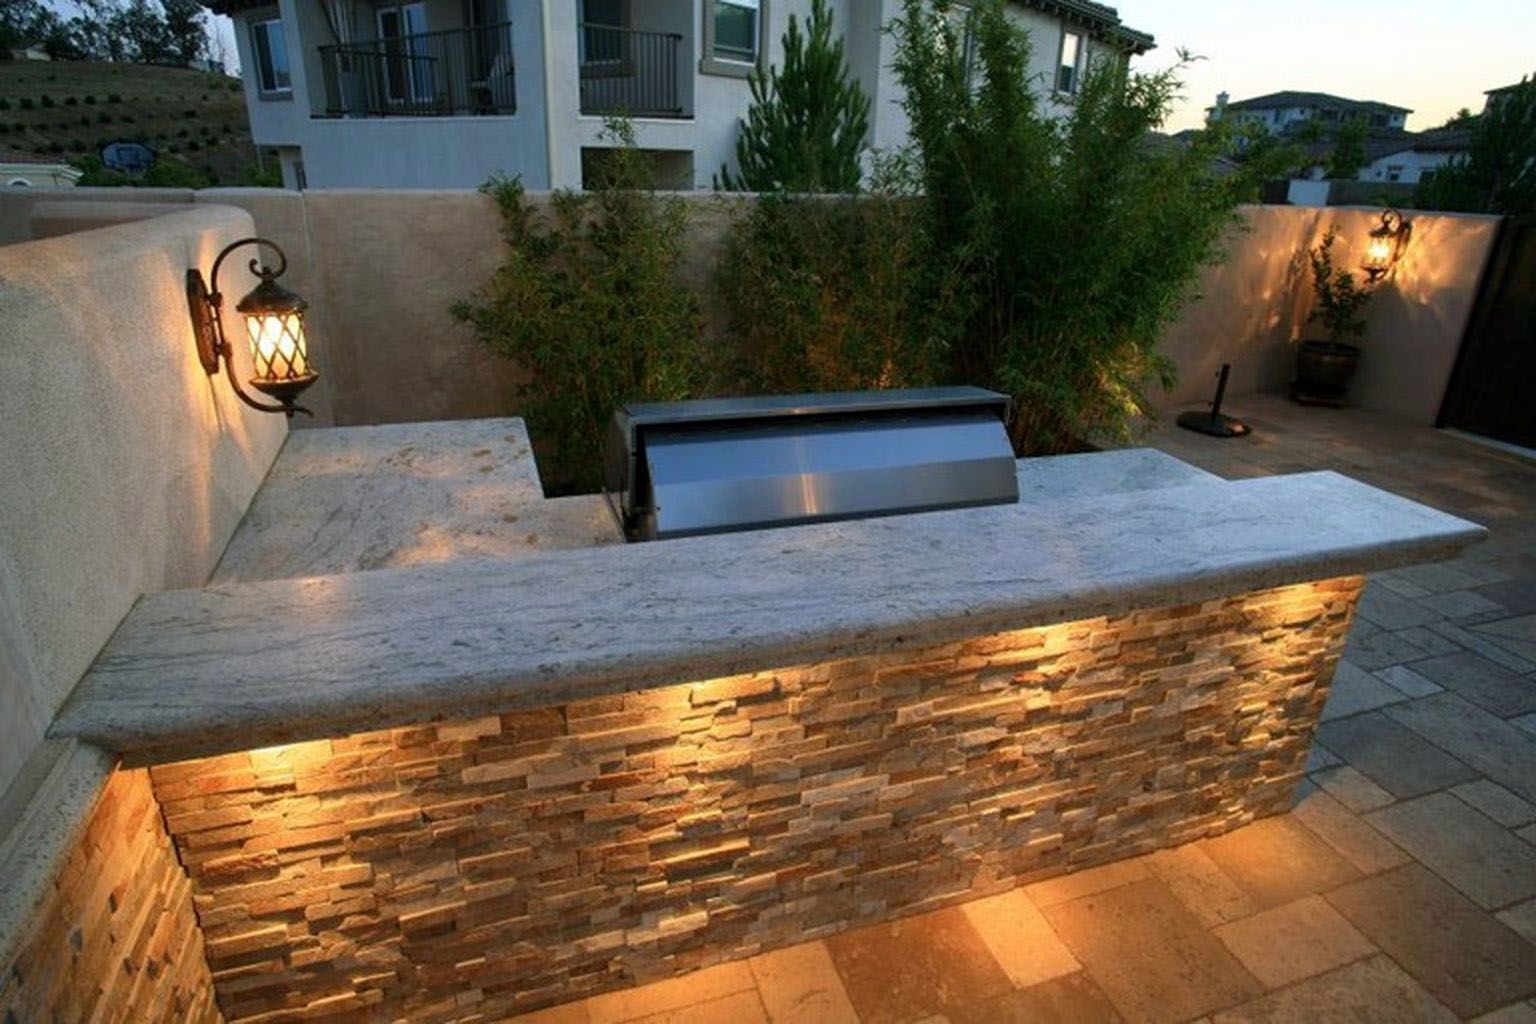 The Importance Of Drainage With Outdoor Kitchen Design